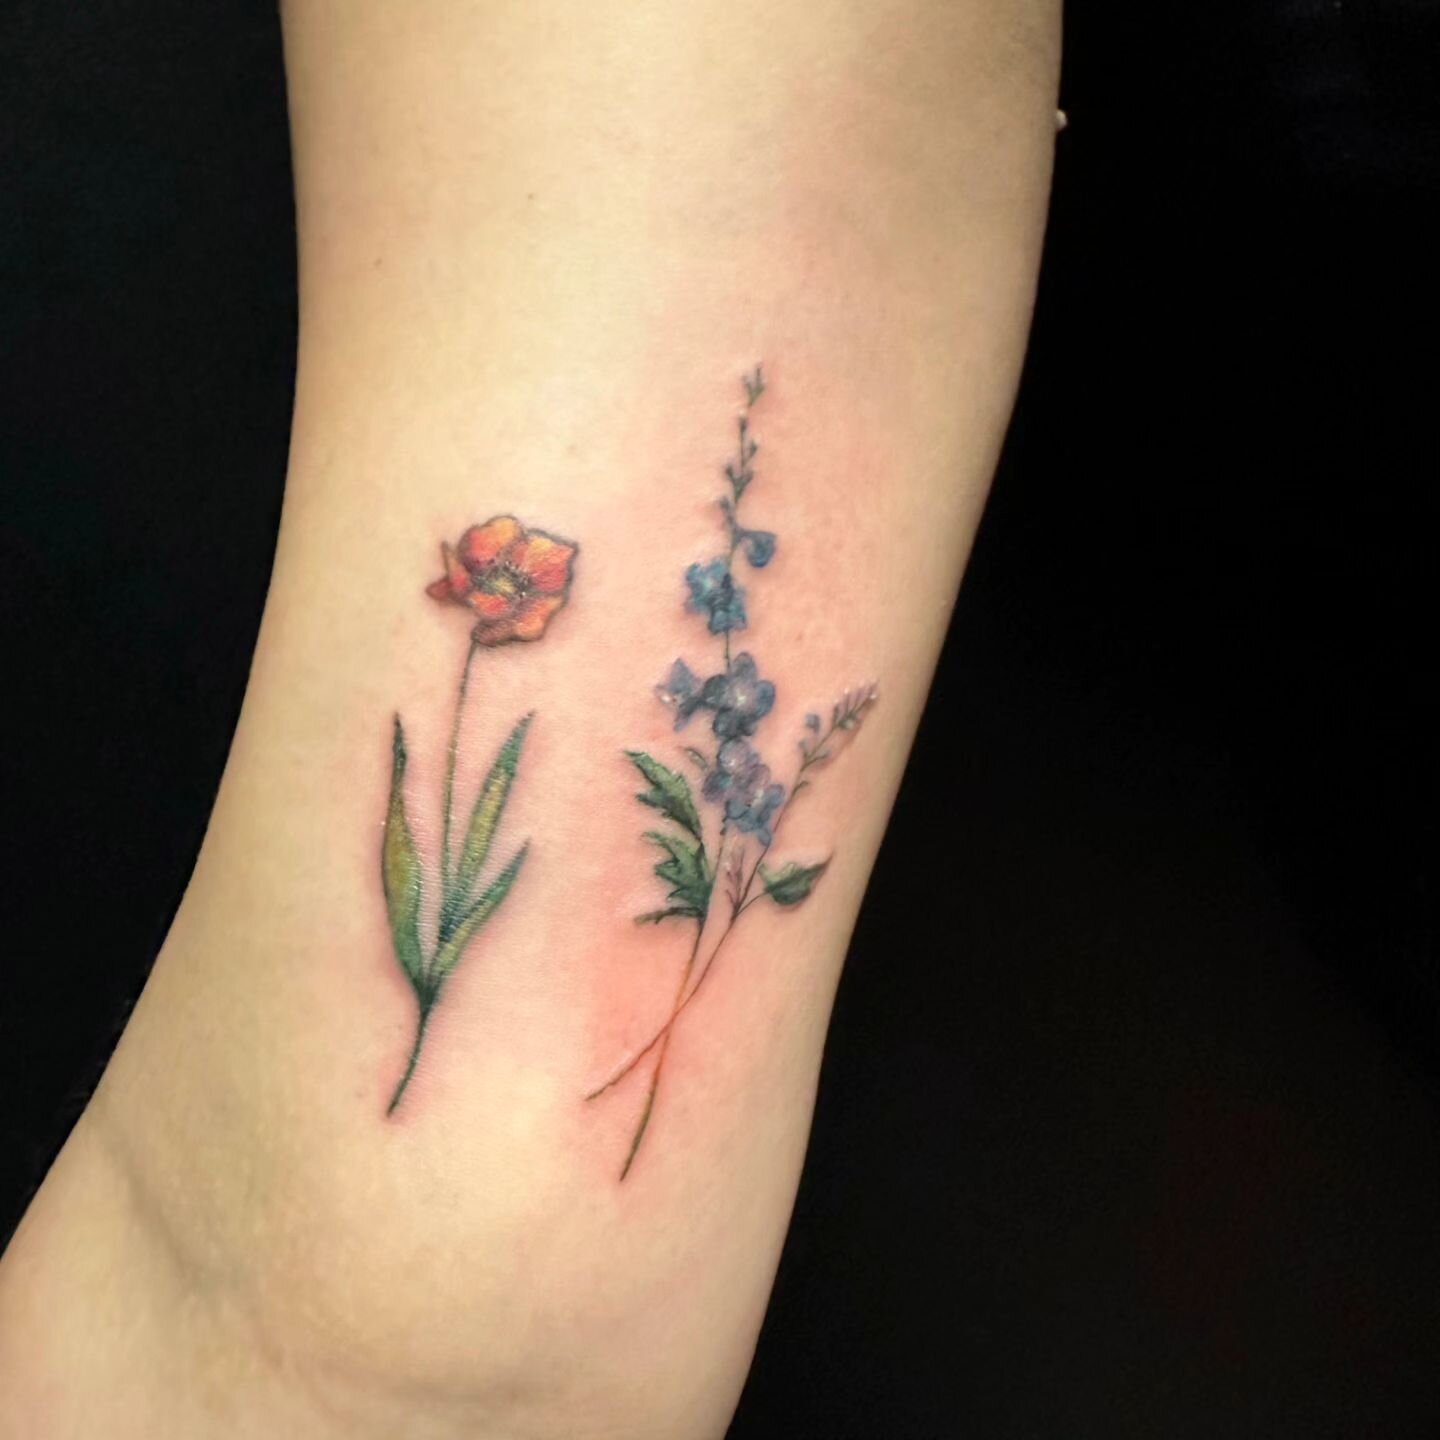 Shout out to this tiny floral touch up and their new companion piece. Spring is in the air for sure! 
.
.
Follow @rogue_tattoopgh
.

.
.
.
.
.
.
.
.

#412 #tattooflash #pittsburghartist #tattooart #tattooer #pittsburghtattoo #tattoo #boldwillhold #pi